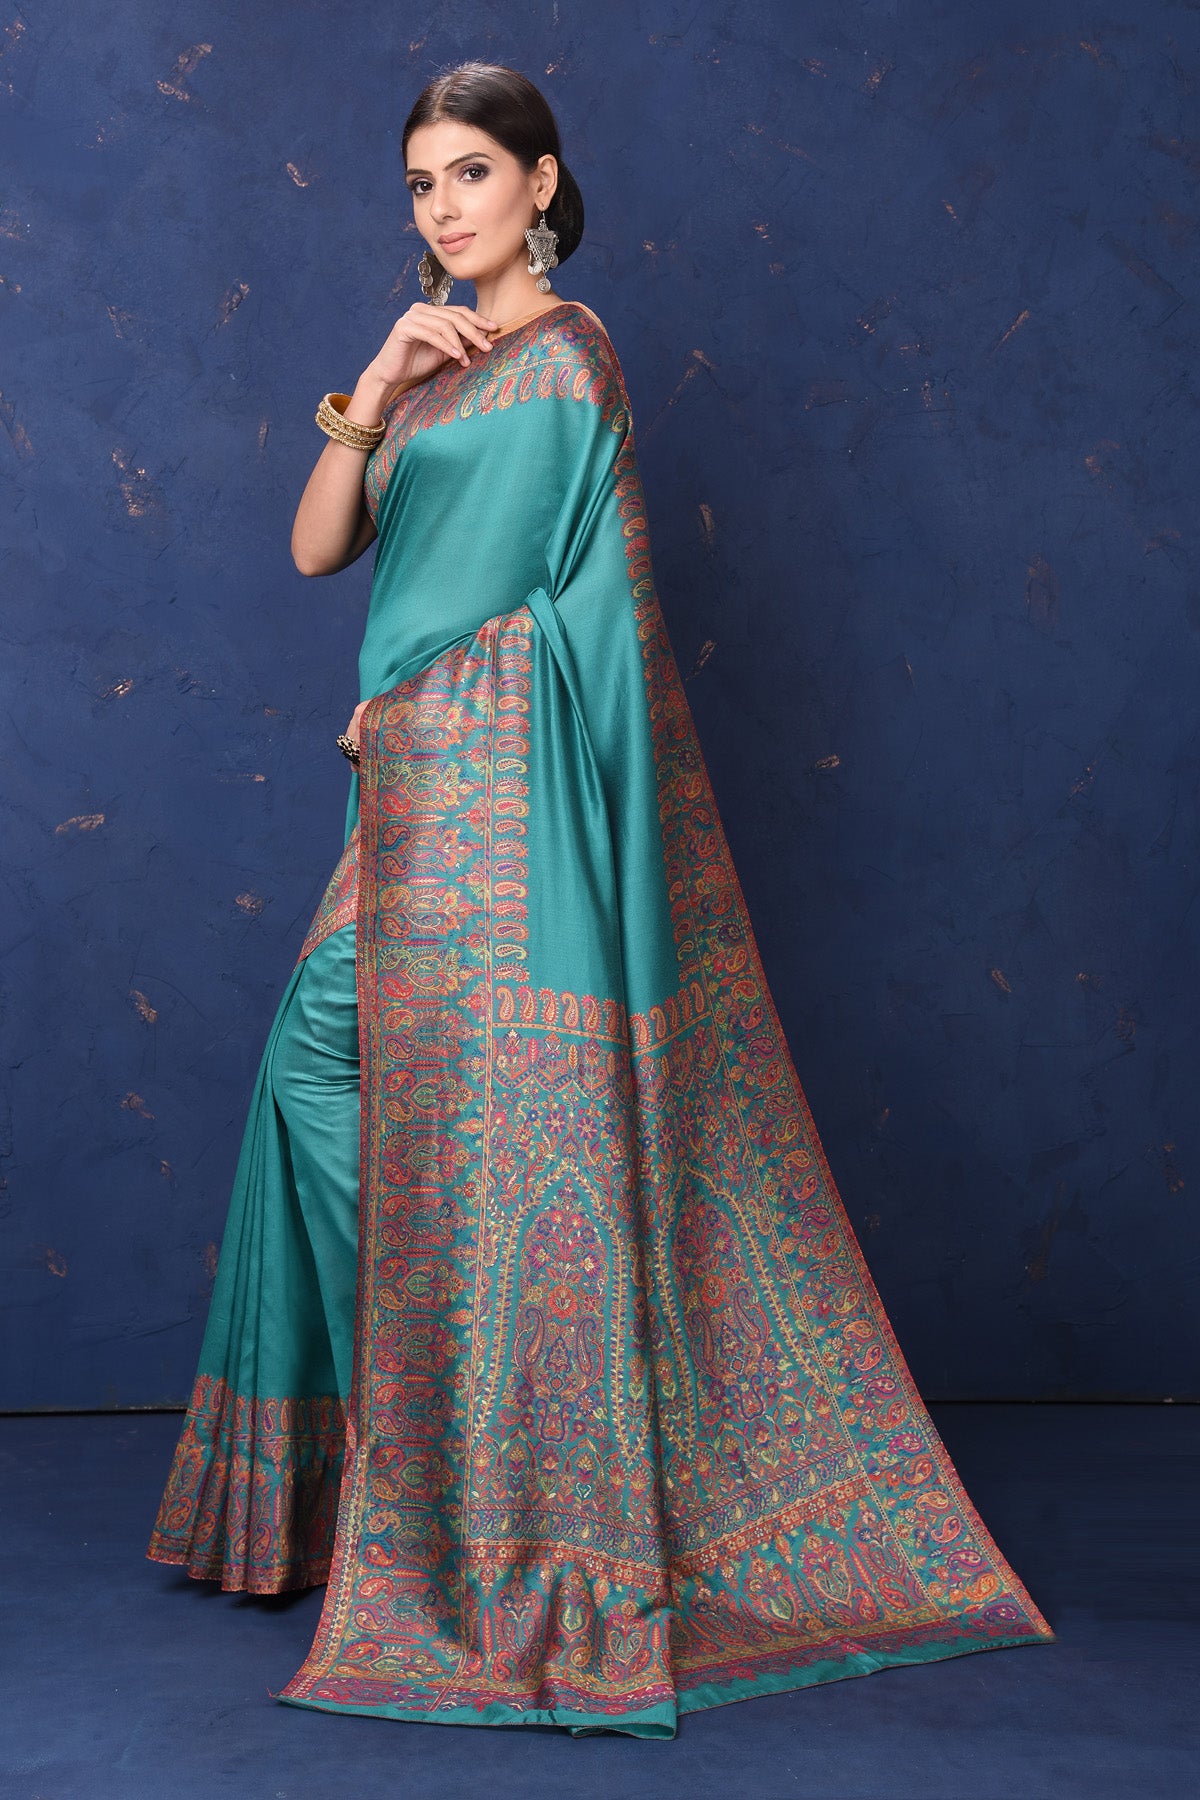 Shop stunning blue tussar muga silk sari online in USA with Kani border. Buy latest designer sarees, handloom saris, embroidered sarees, Bollywood sarees, fancy sarees for special occasions from Pure Elegance Indian fashion store in USA. Shop soft silk sarees, pure Banarasi sarees, cotton sarees, georgette sarees. -side